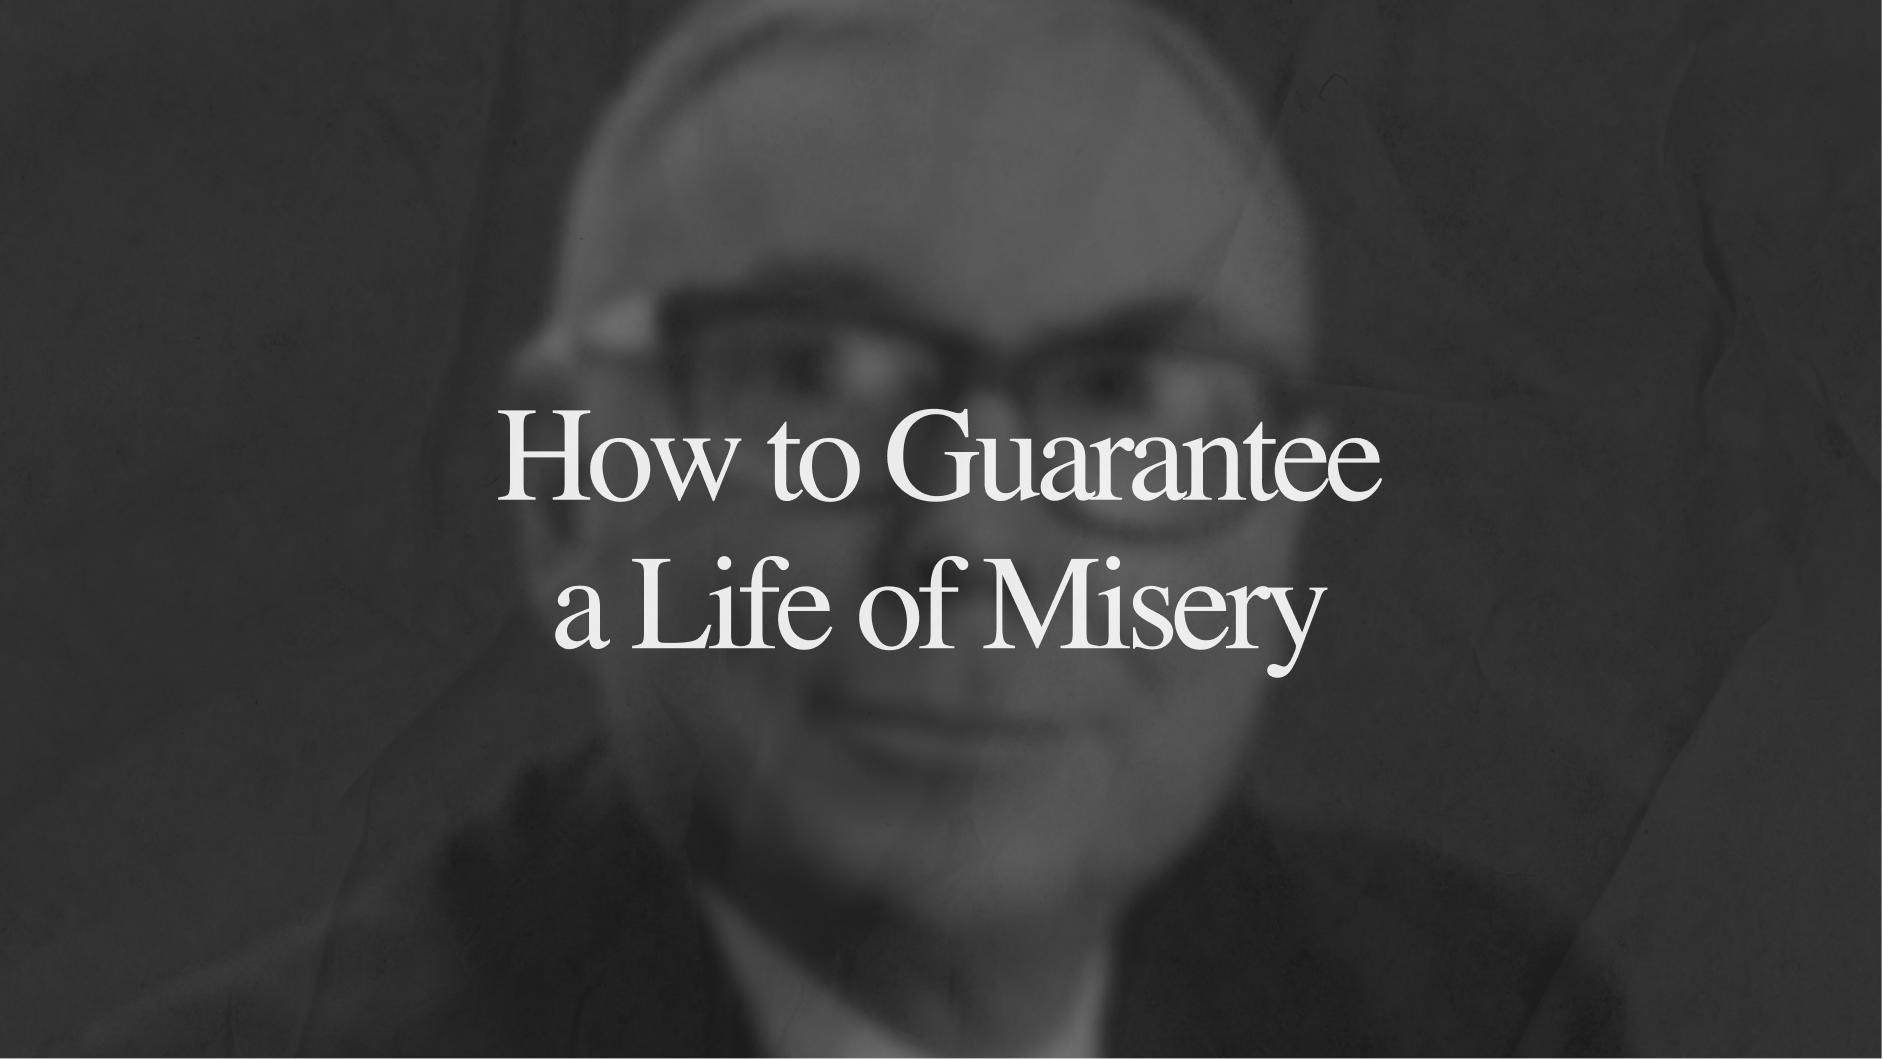 How to Guarantee a Life of Misery